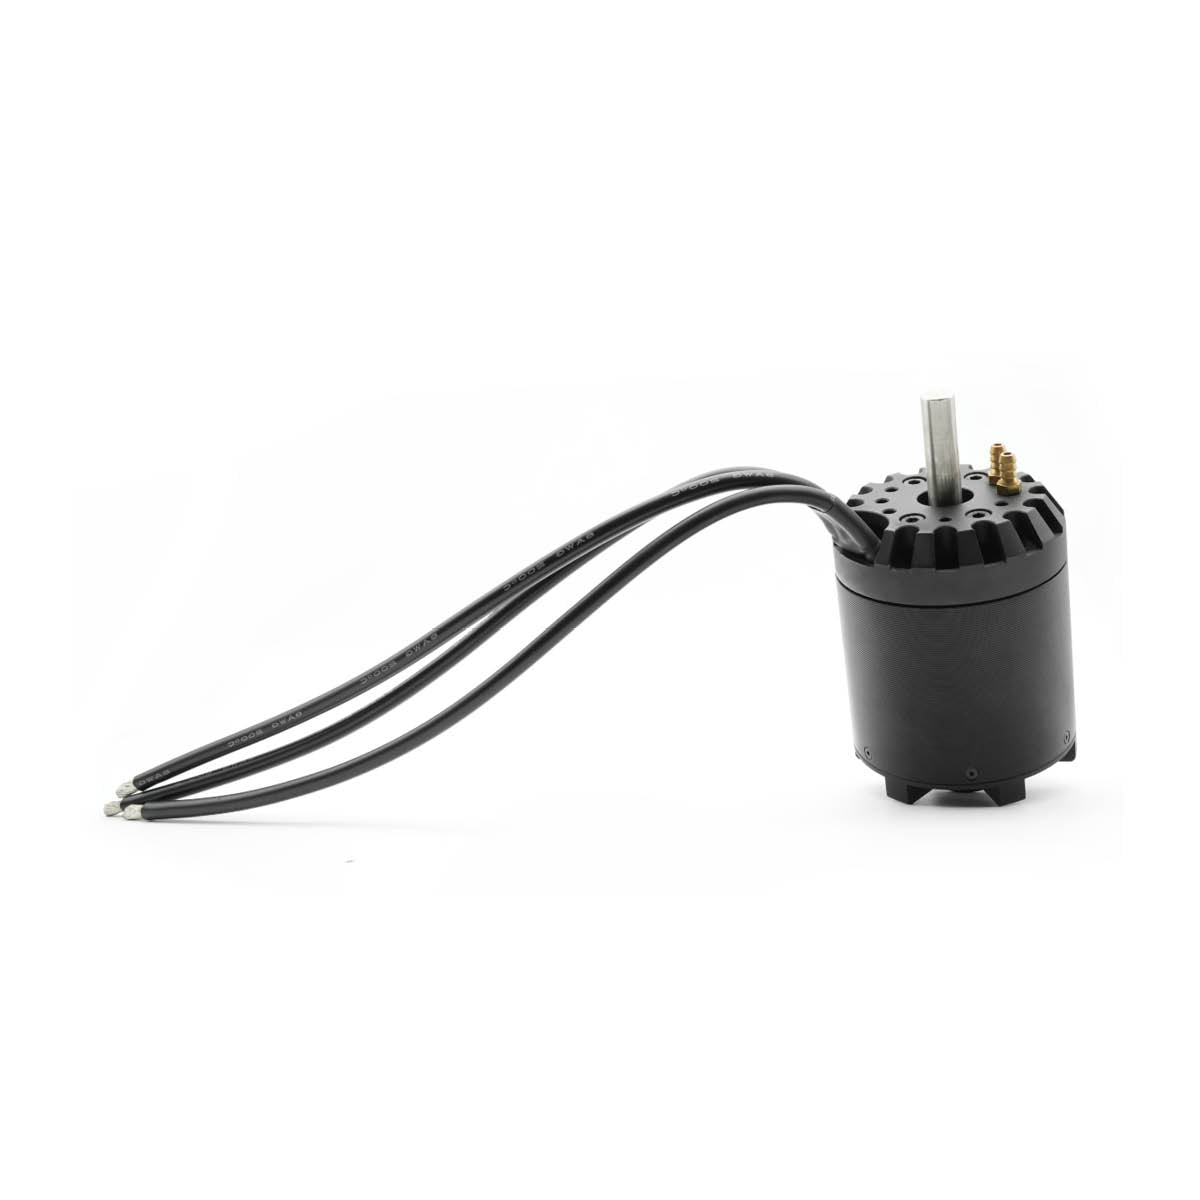 83100 Watercooling BLDC Motor with 34KG Thrust for Foil Electric Surfboard Electric Boat